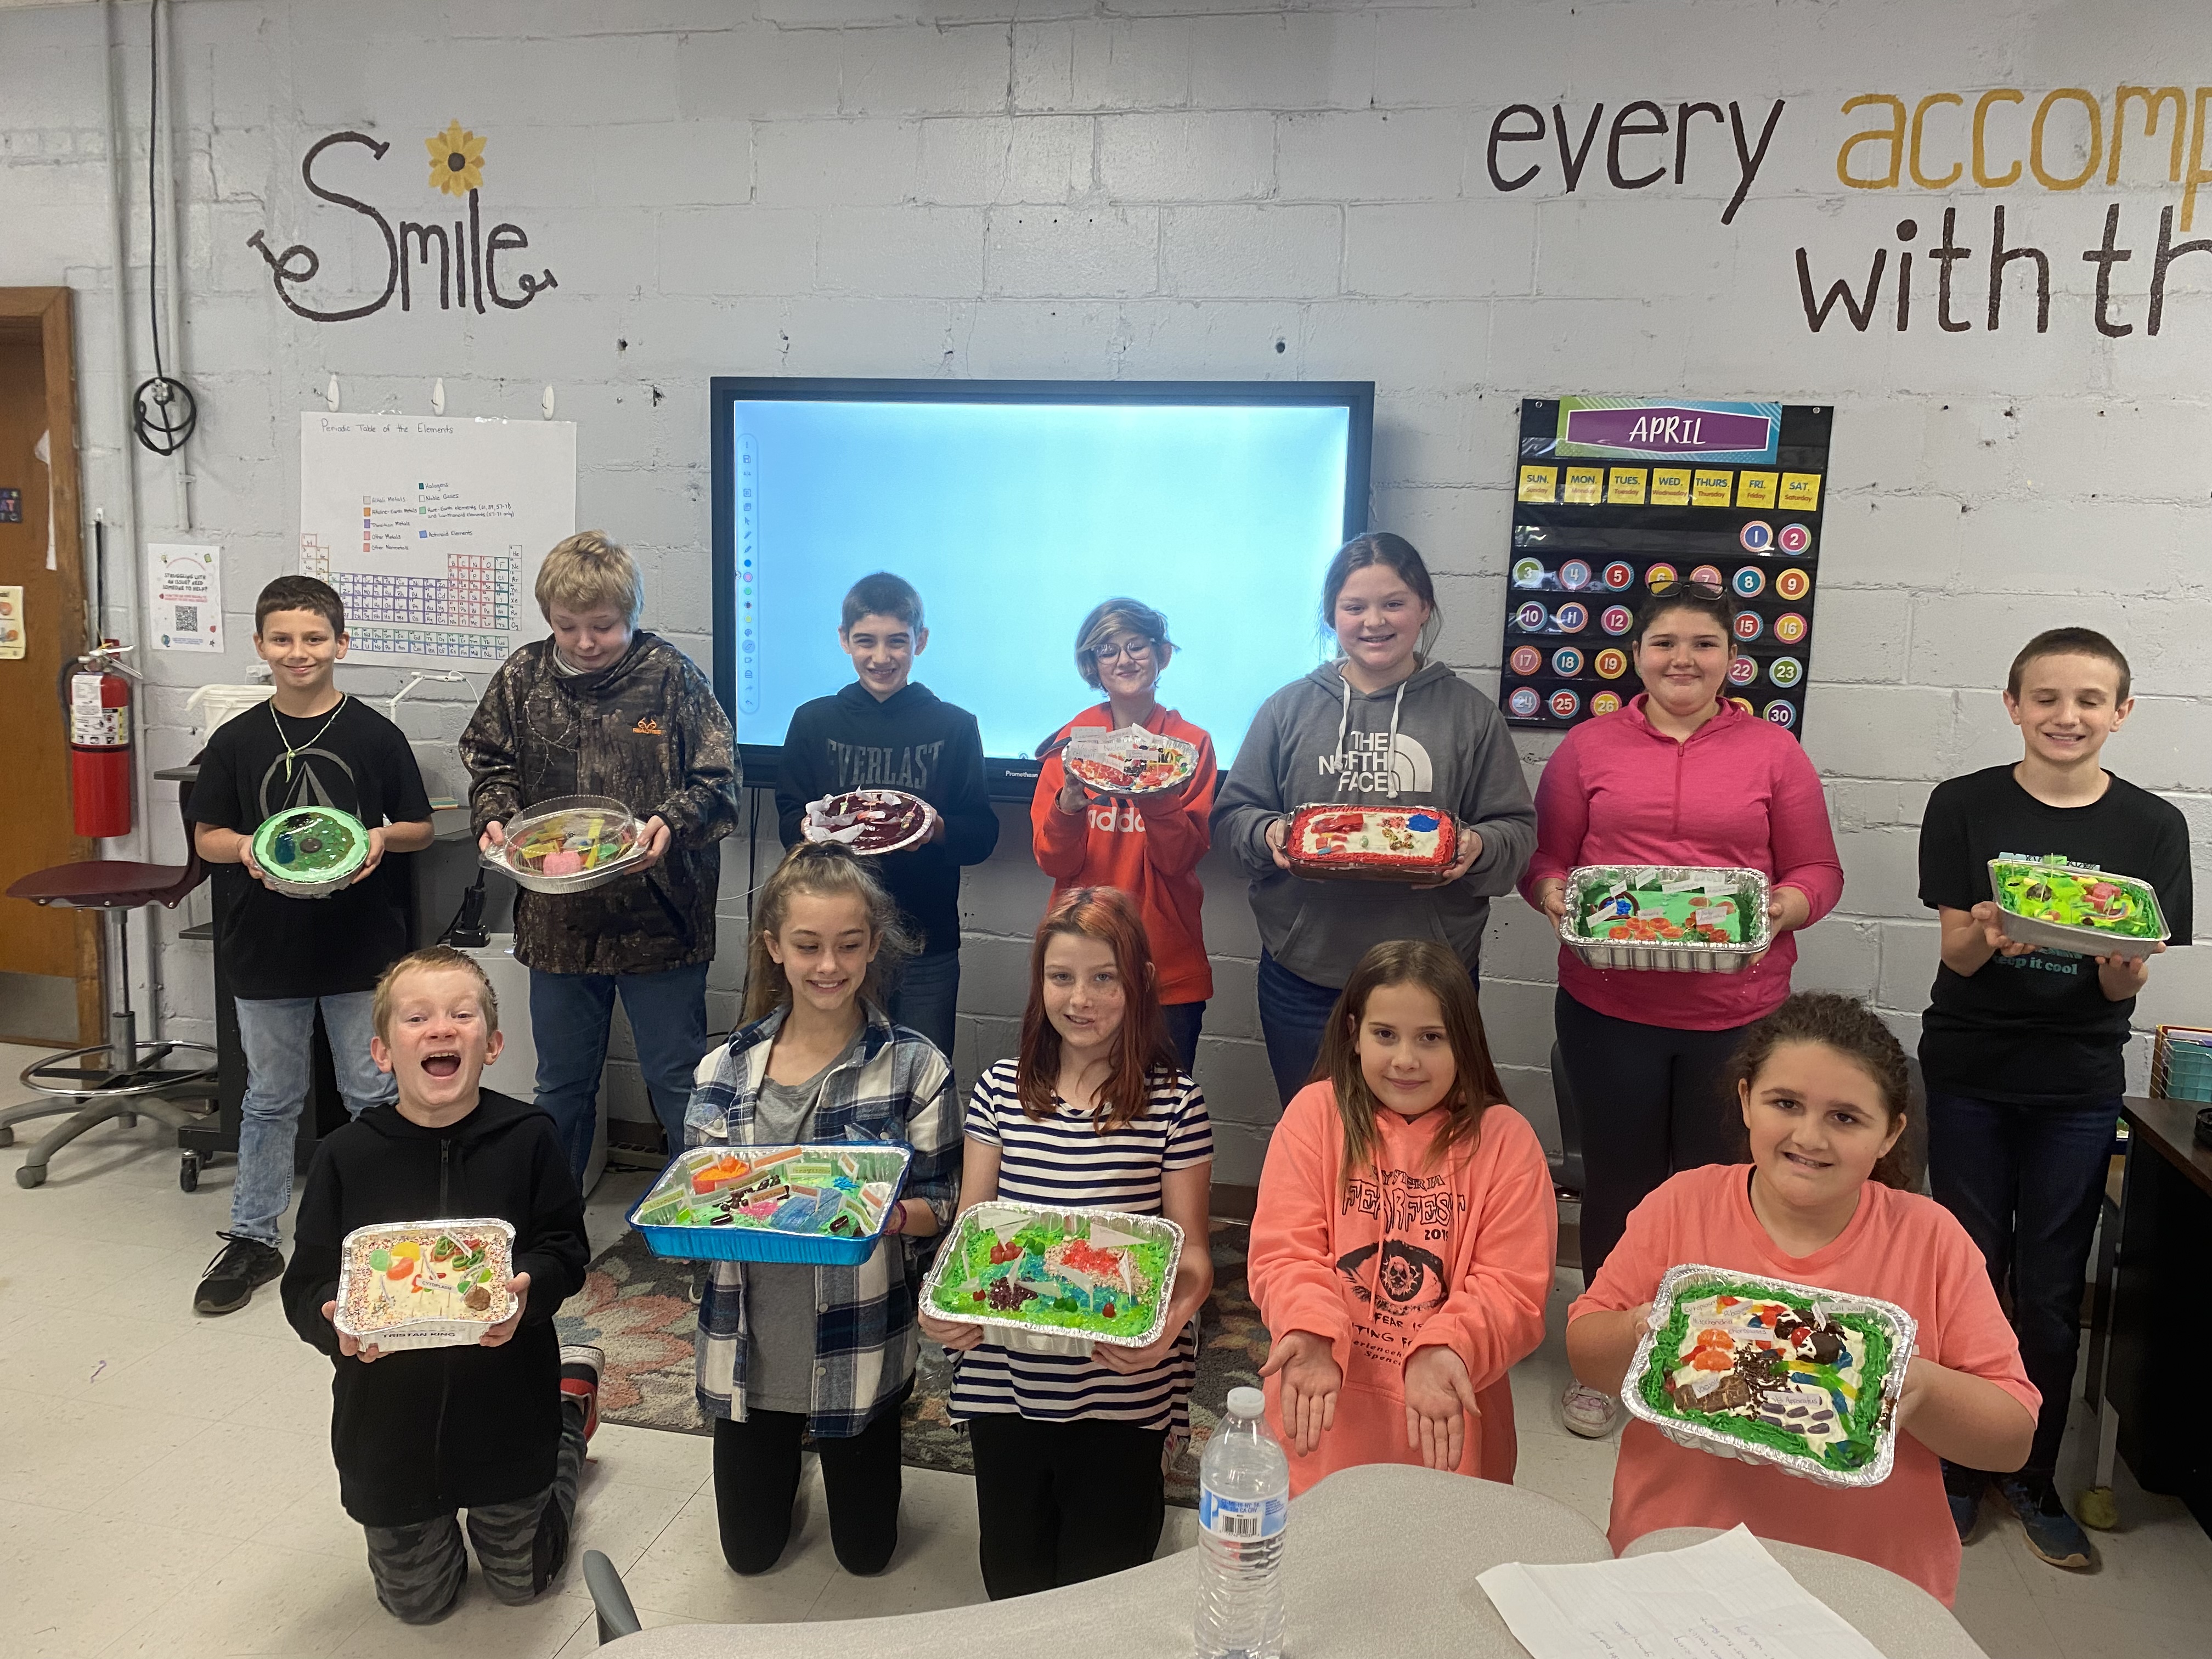 Mrs. Marshall's edible plant cell project